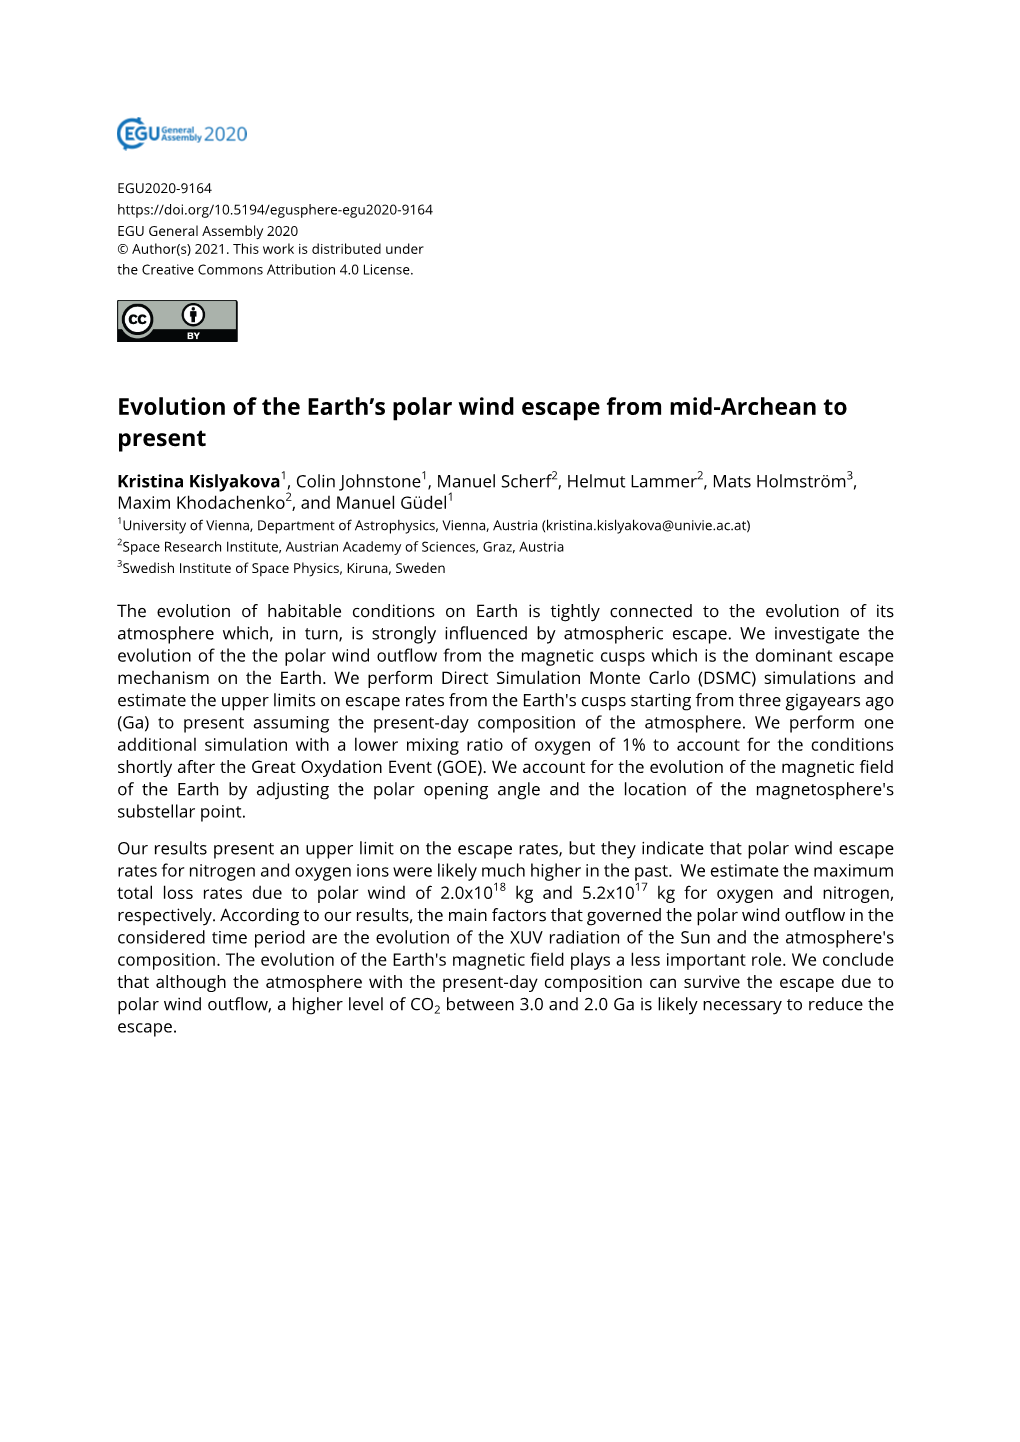 Evolution of the Earth's Polar Wind Escape from Mid-Archean to Present